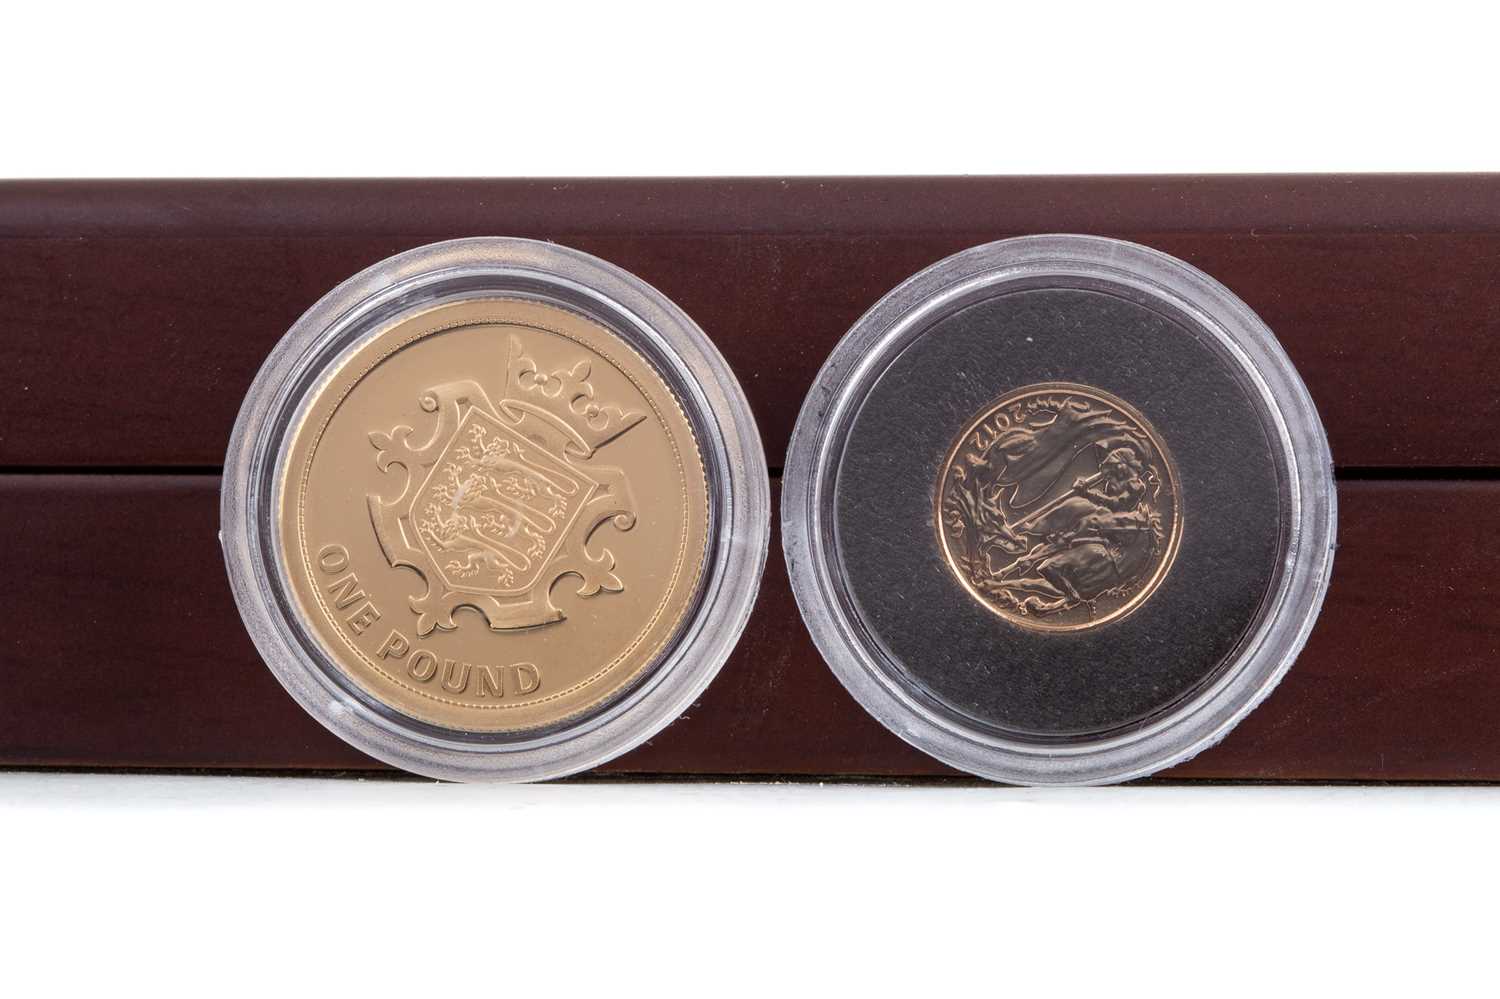 A GOLD PROOF ONE POUND COIN AND A 2012 QUARTER GOLD SOVEREIGN